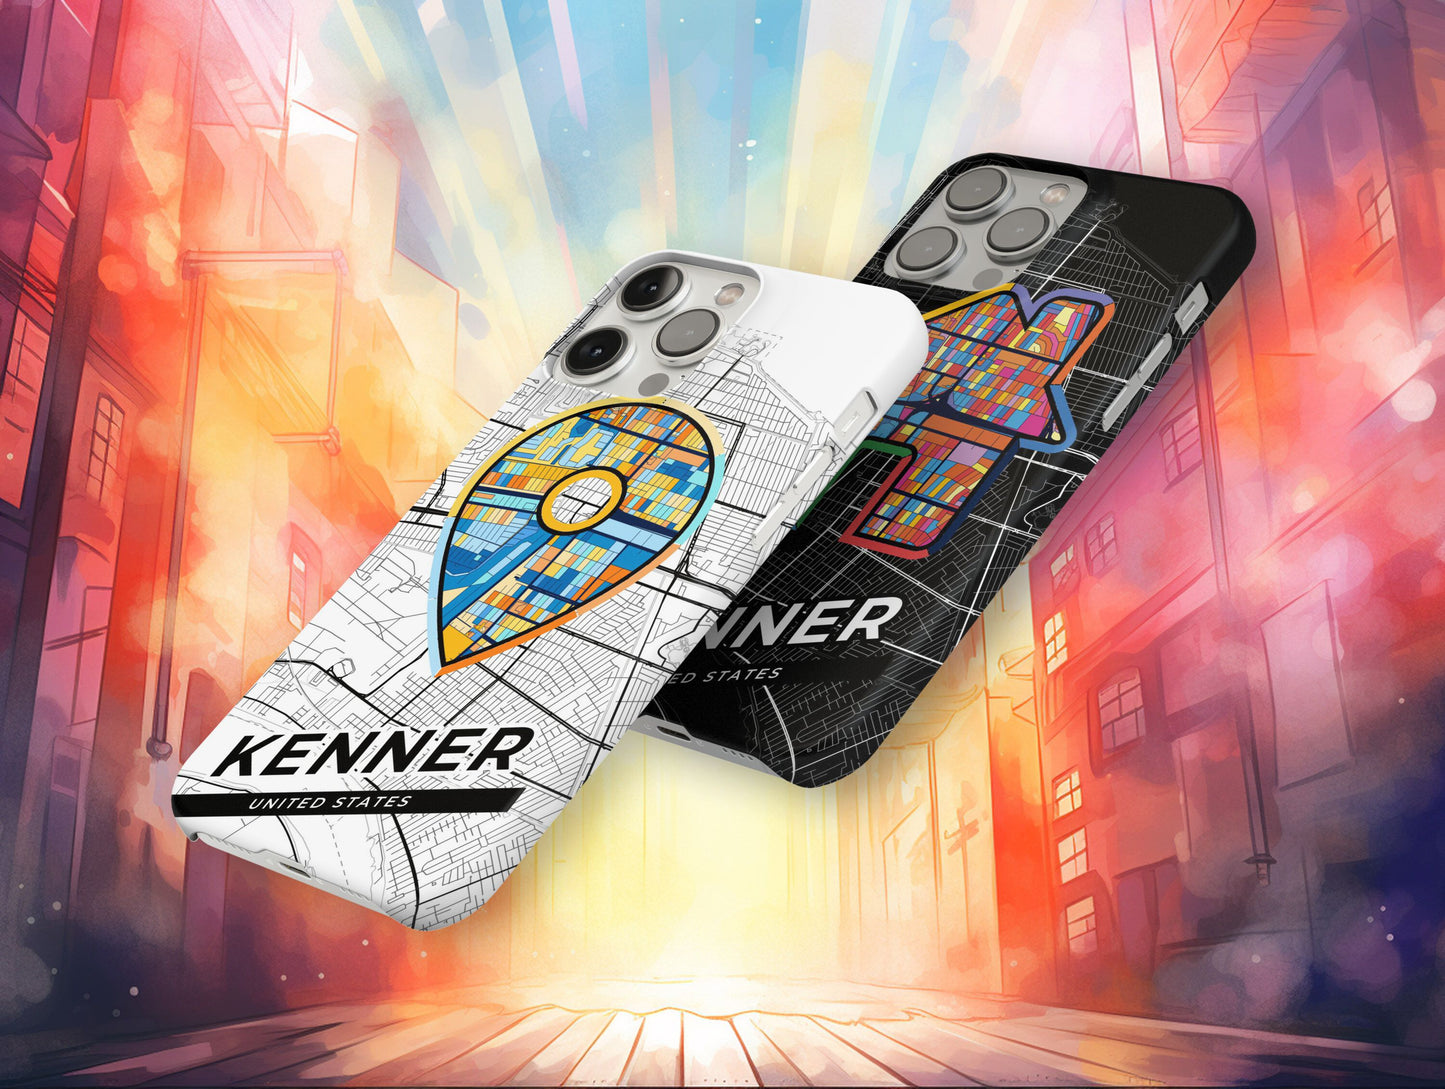 Kenner Louisiana slim phone case with colorful icon. Birthday, wedding or housewarming gift. Couple match cases.